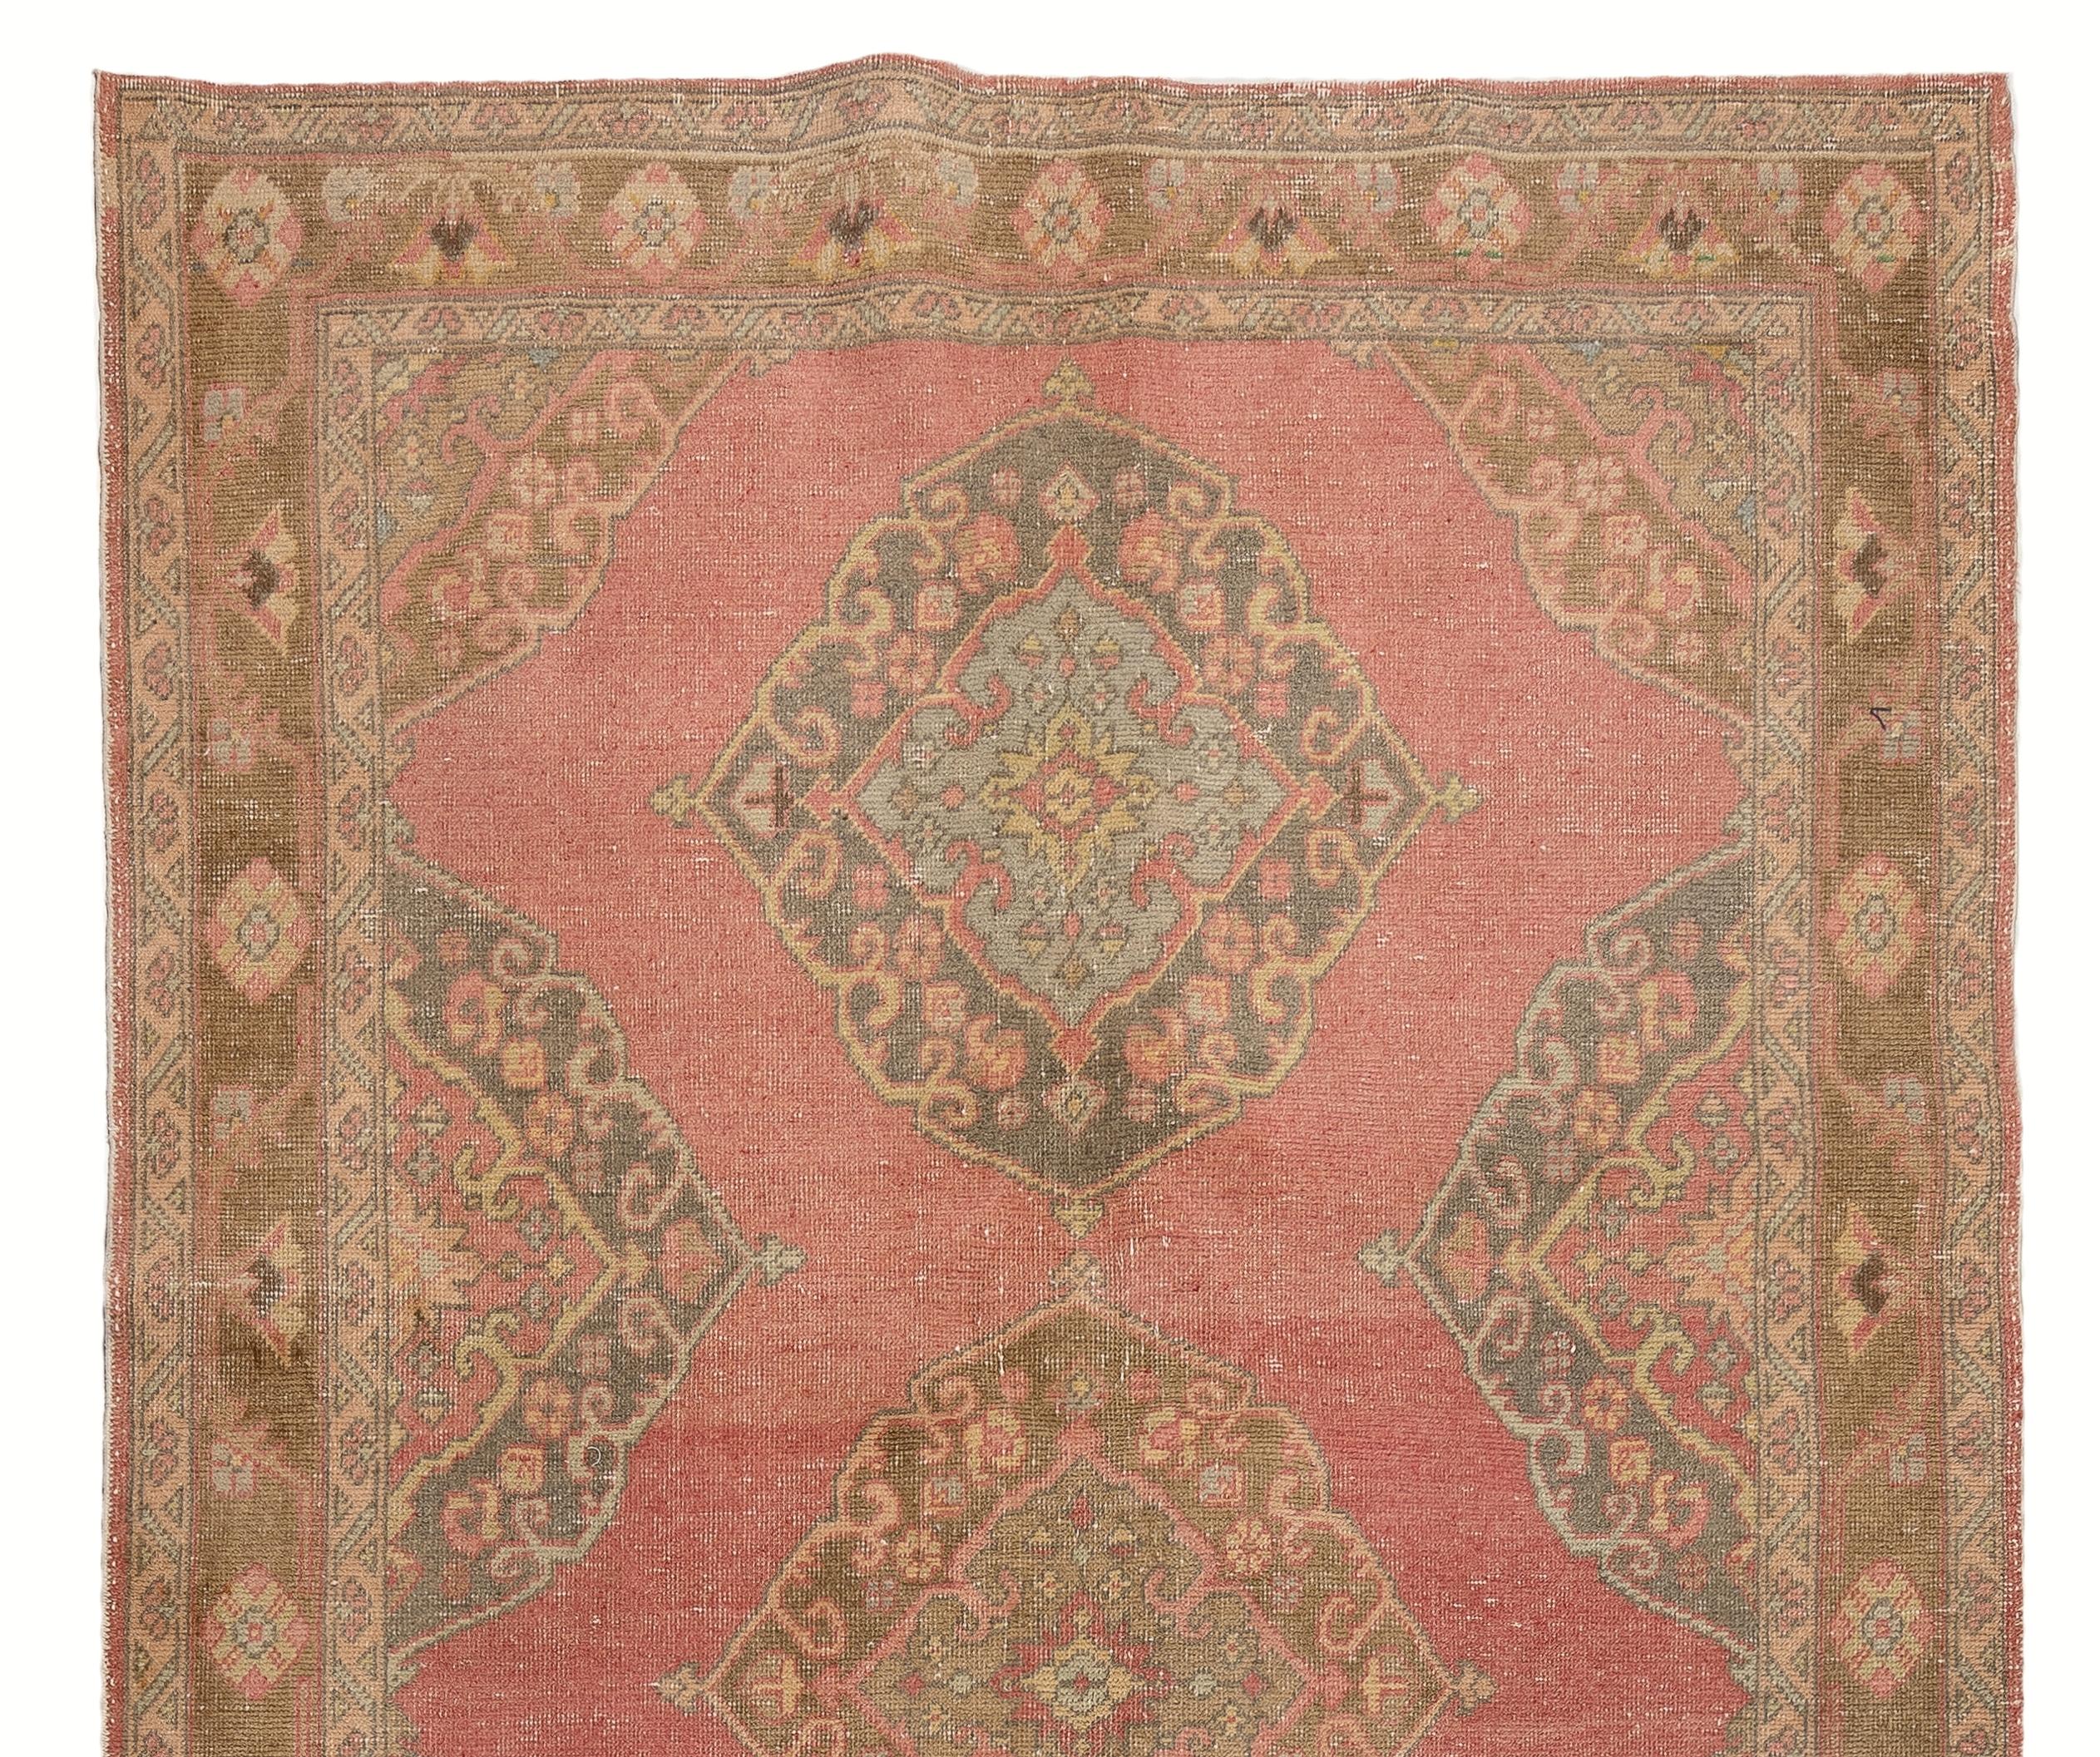 A vintage runner rug from Turkey. It has distressed low wool pile on cotton foundation and features multiple medallion design in soft colors. It has been washed professionally, the rug is sturdy and can be used in both residential or commercial